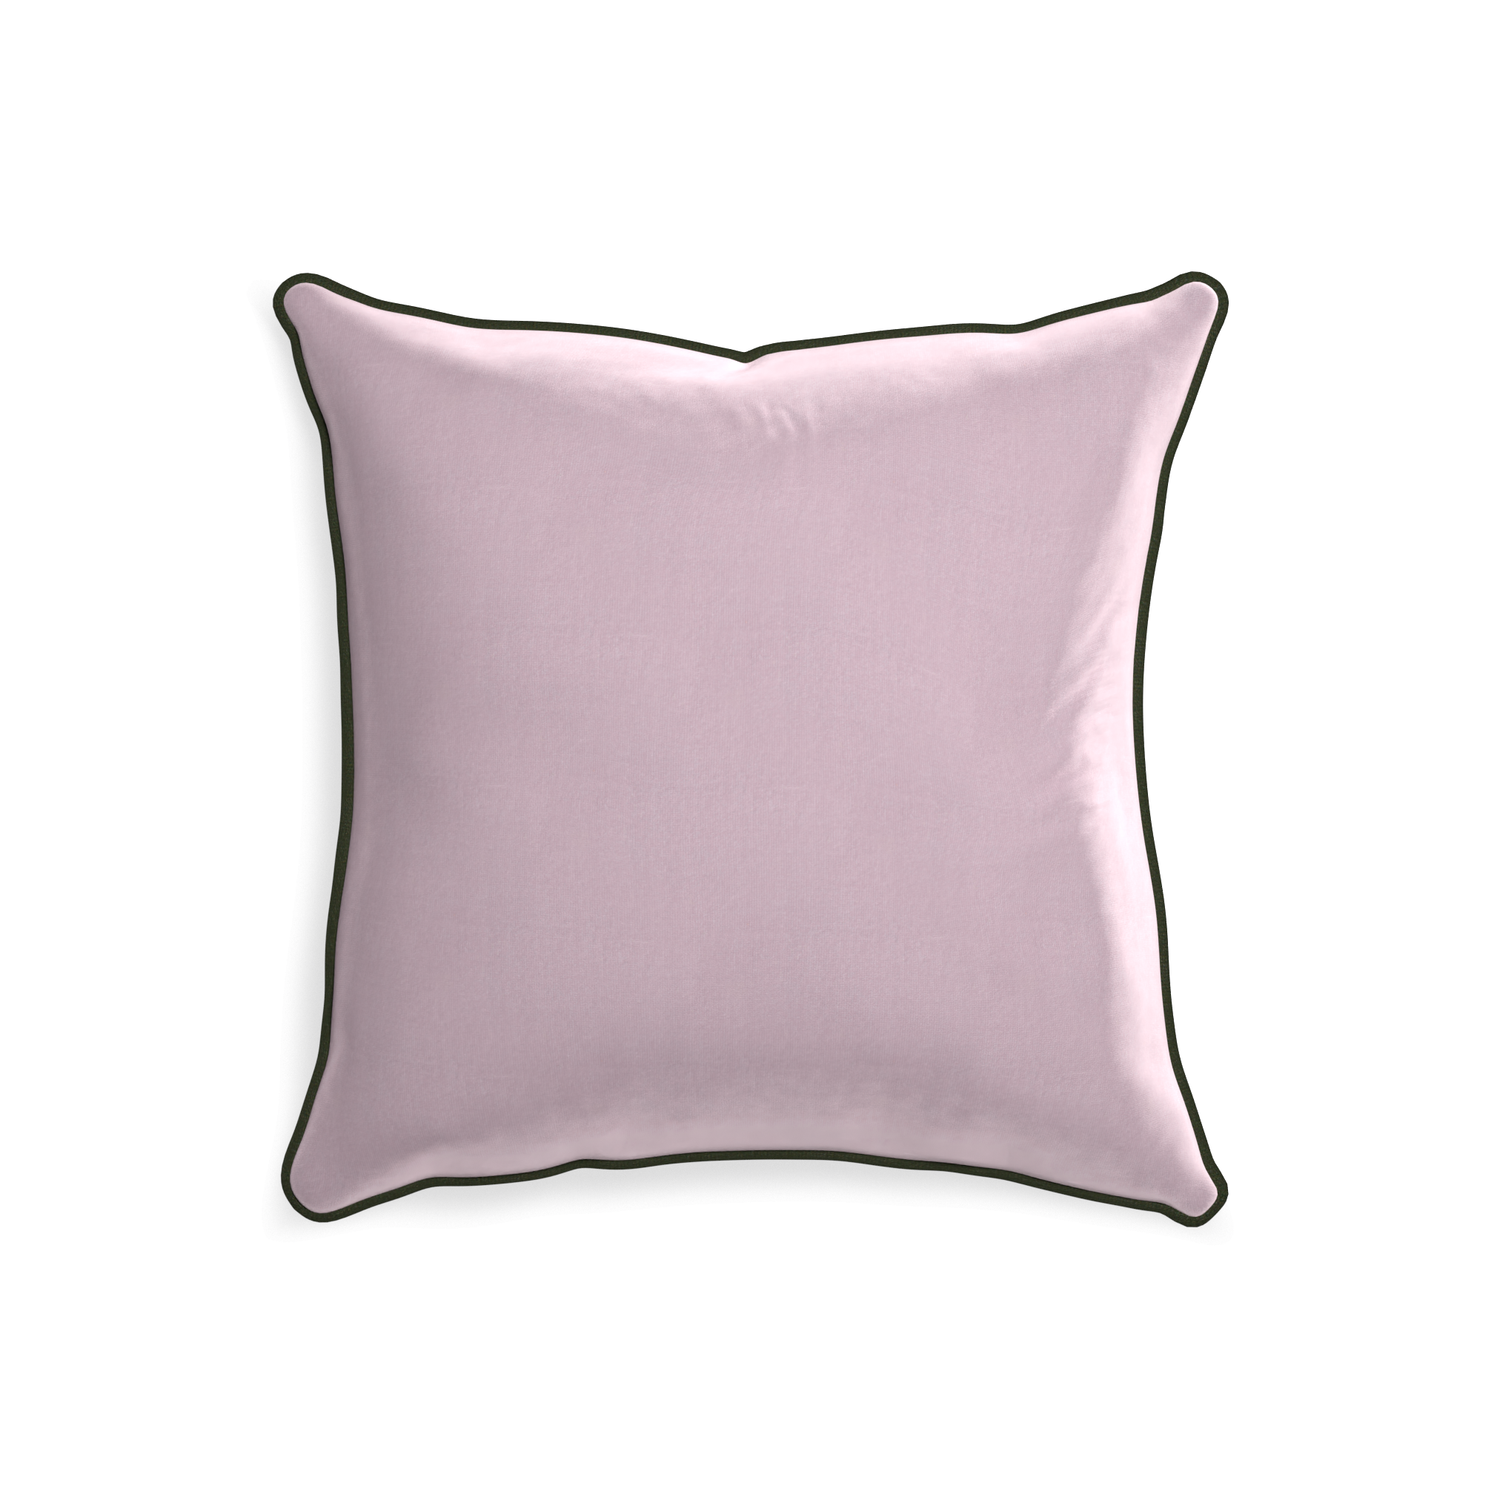 20-square lilac velvet custom lilacpillow with f piping on white background